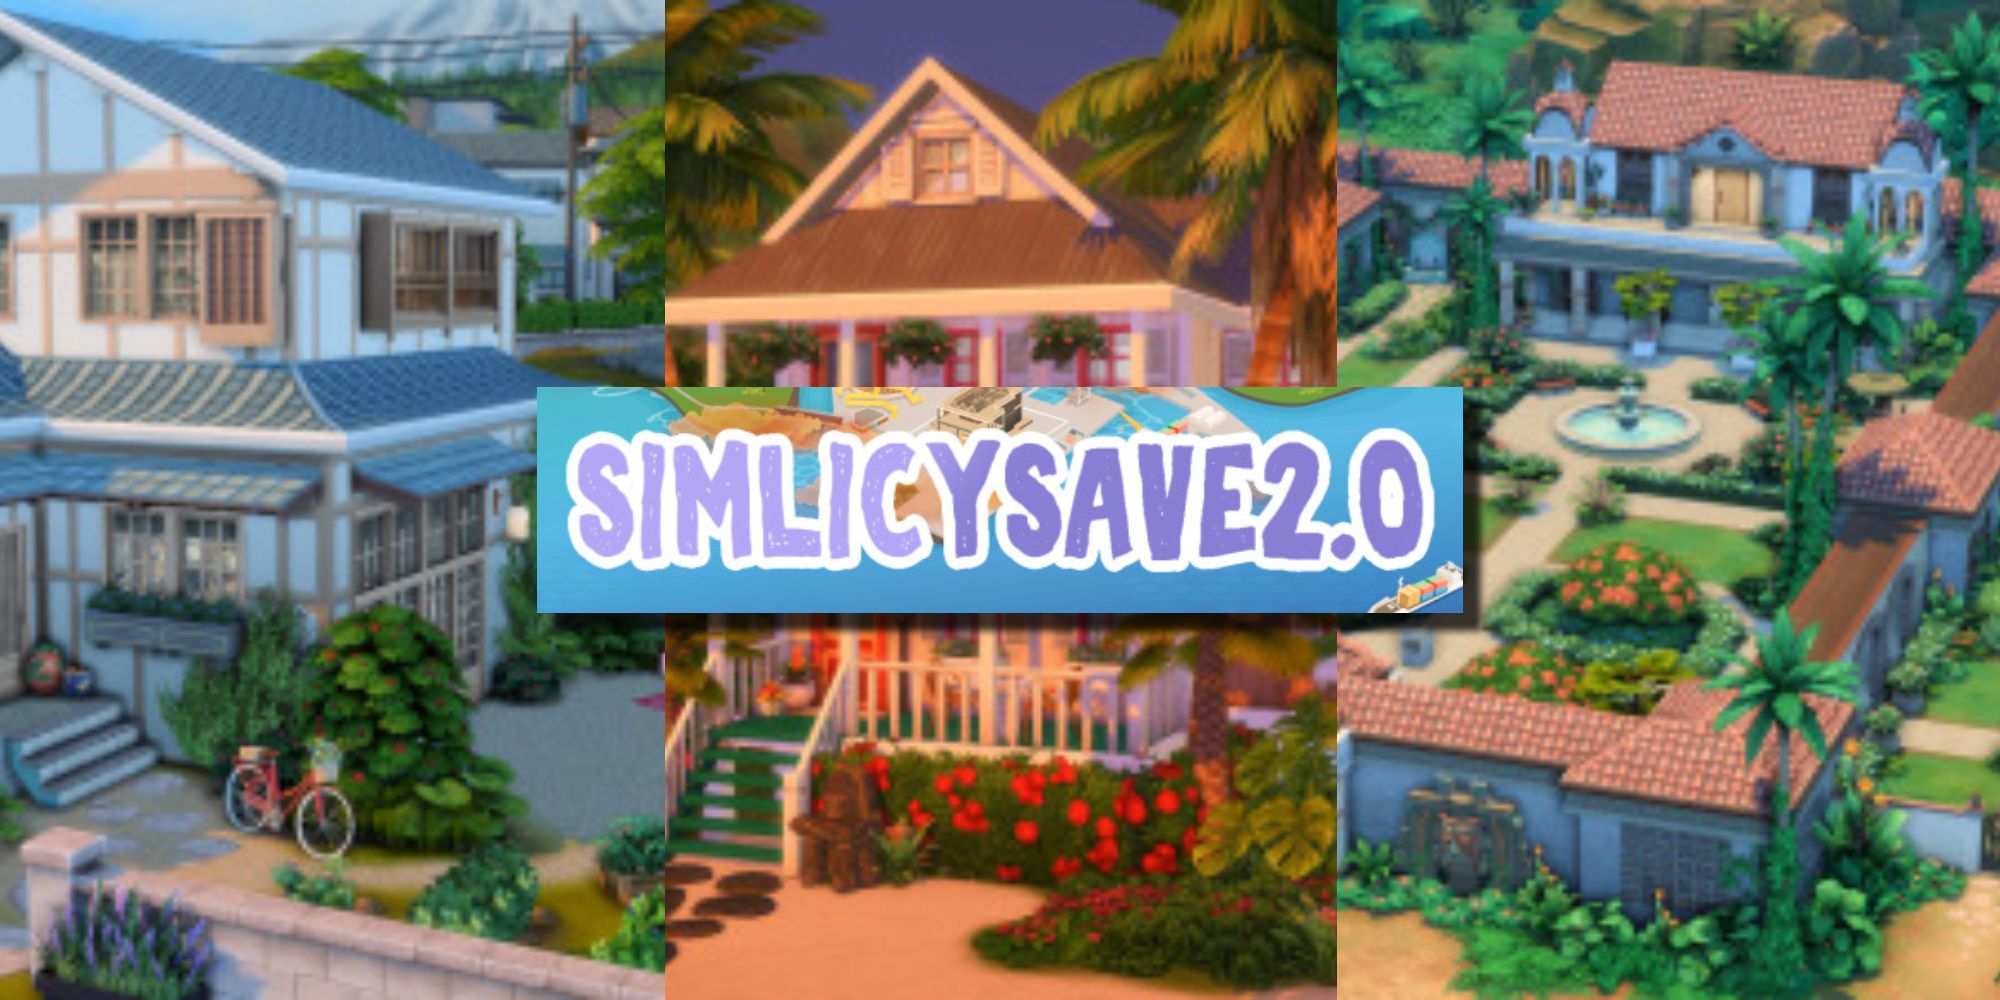 A series of houses from the SimLicy Save 2.0 save file for The Sims 4